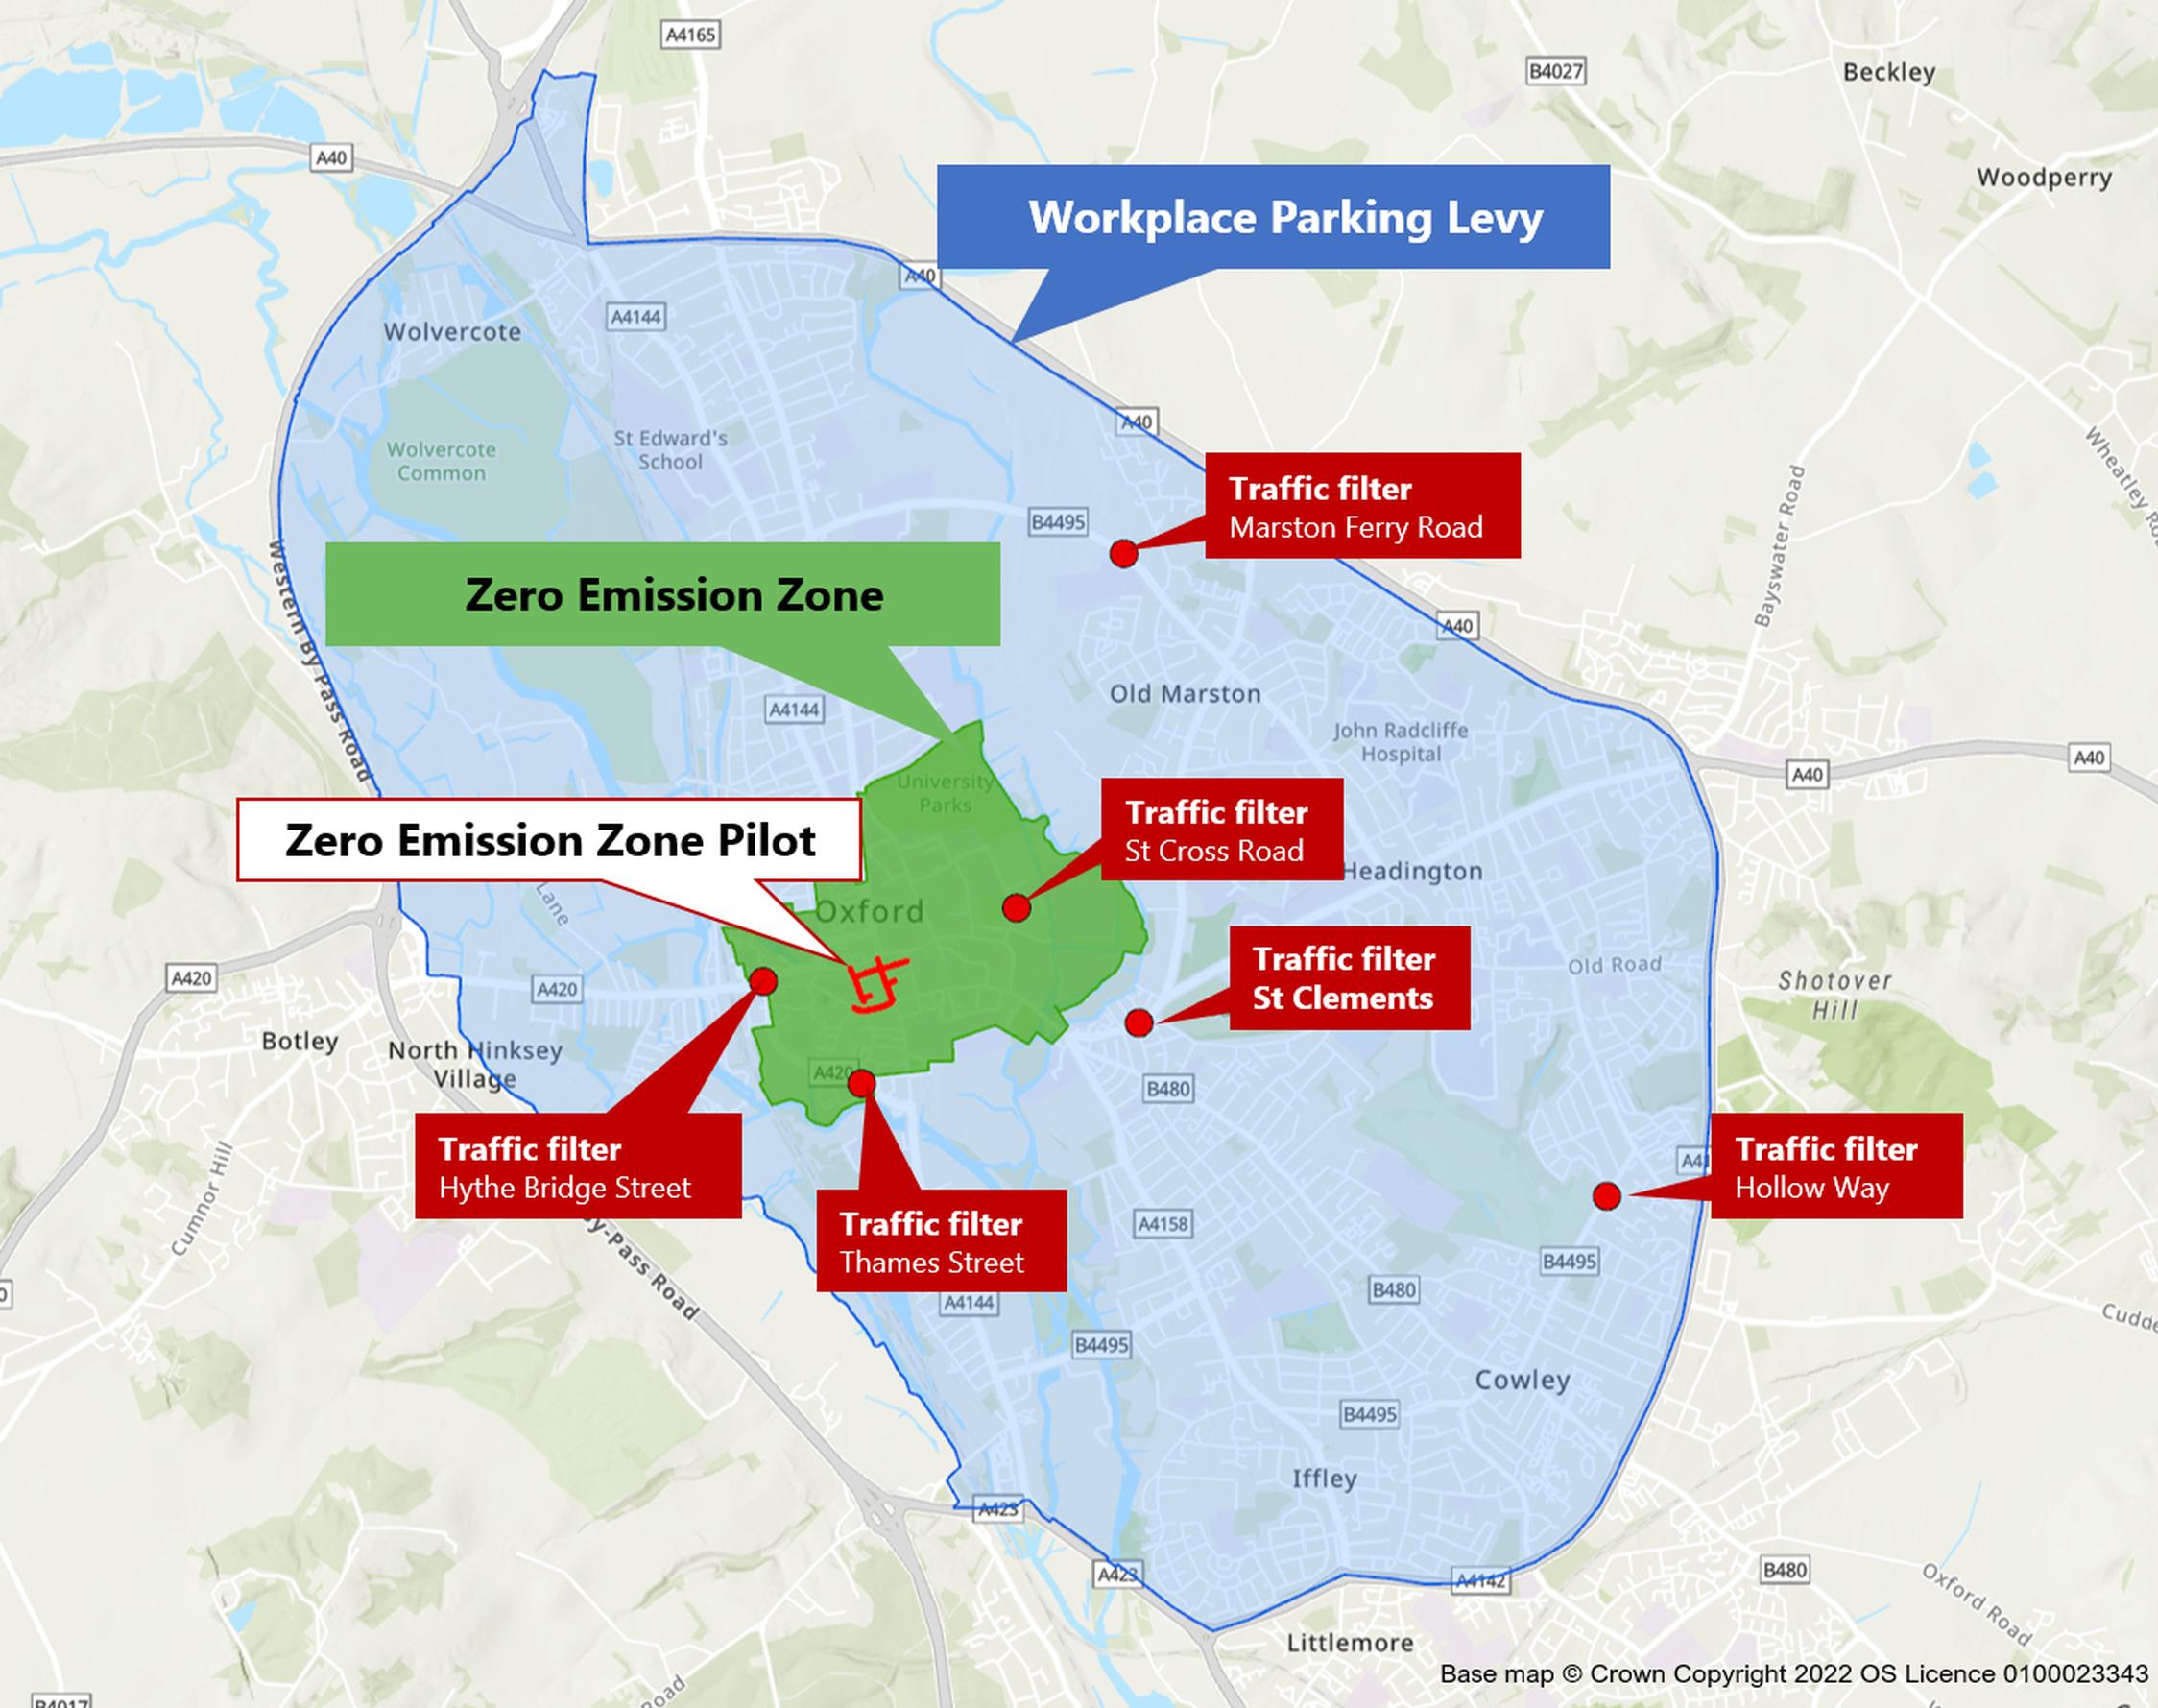 The ZEZ, workplace parking levy and traffic filter plan